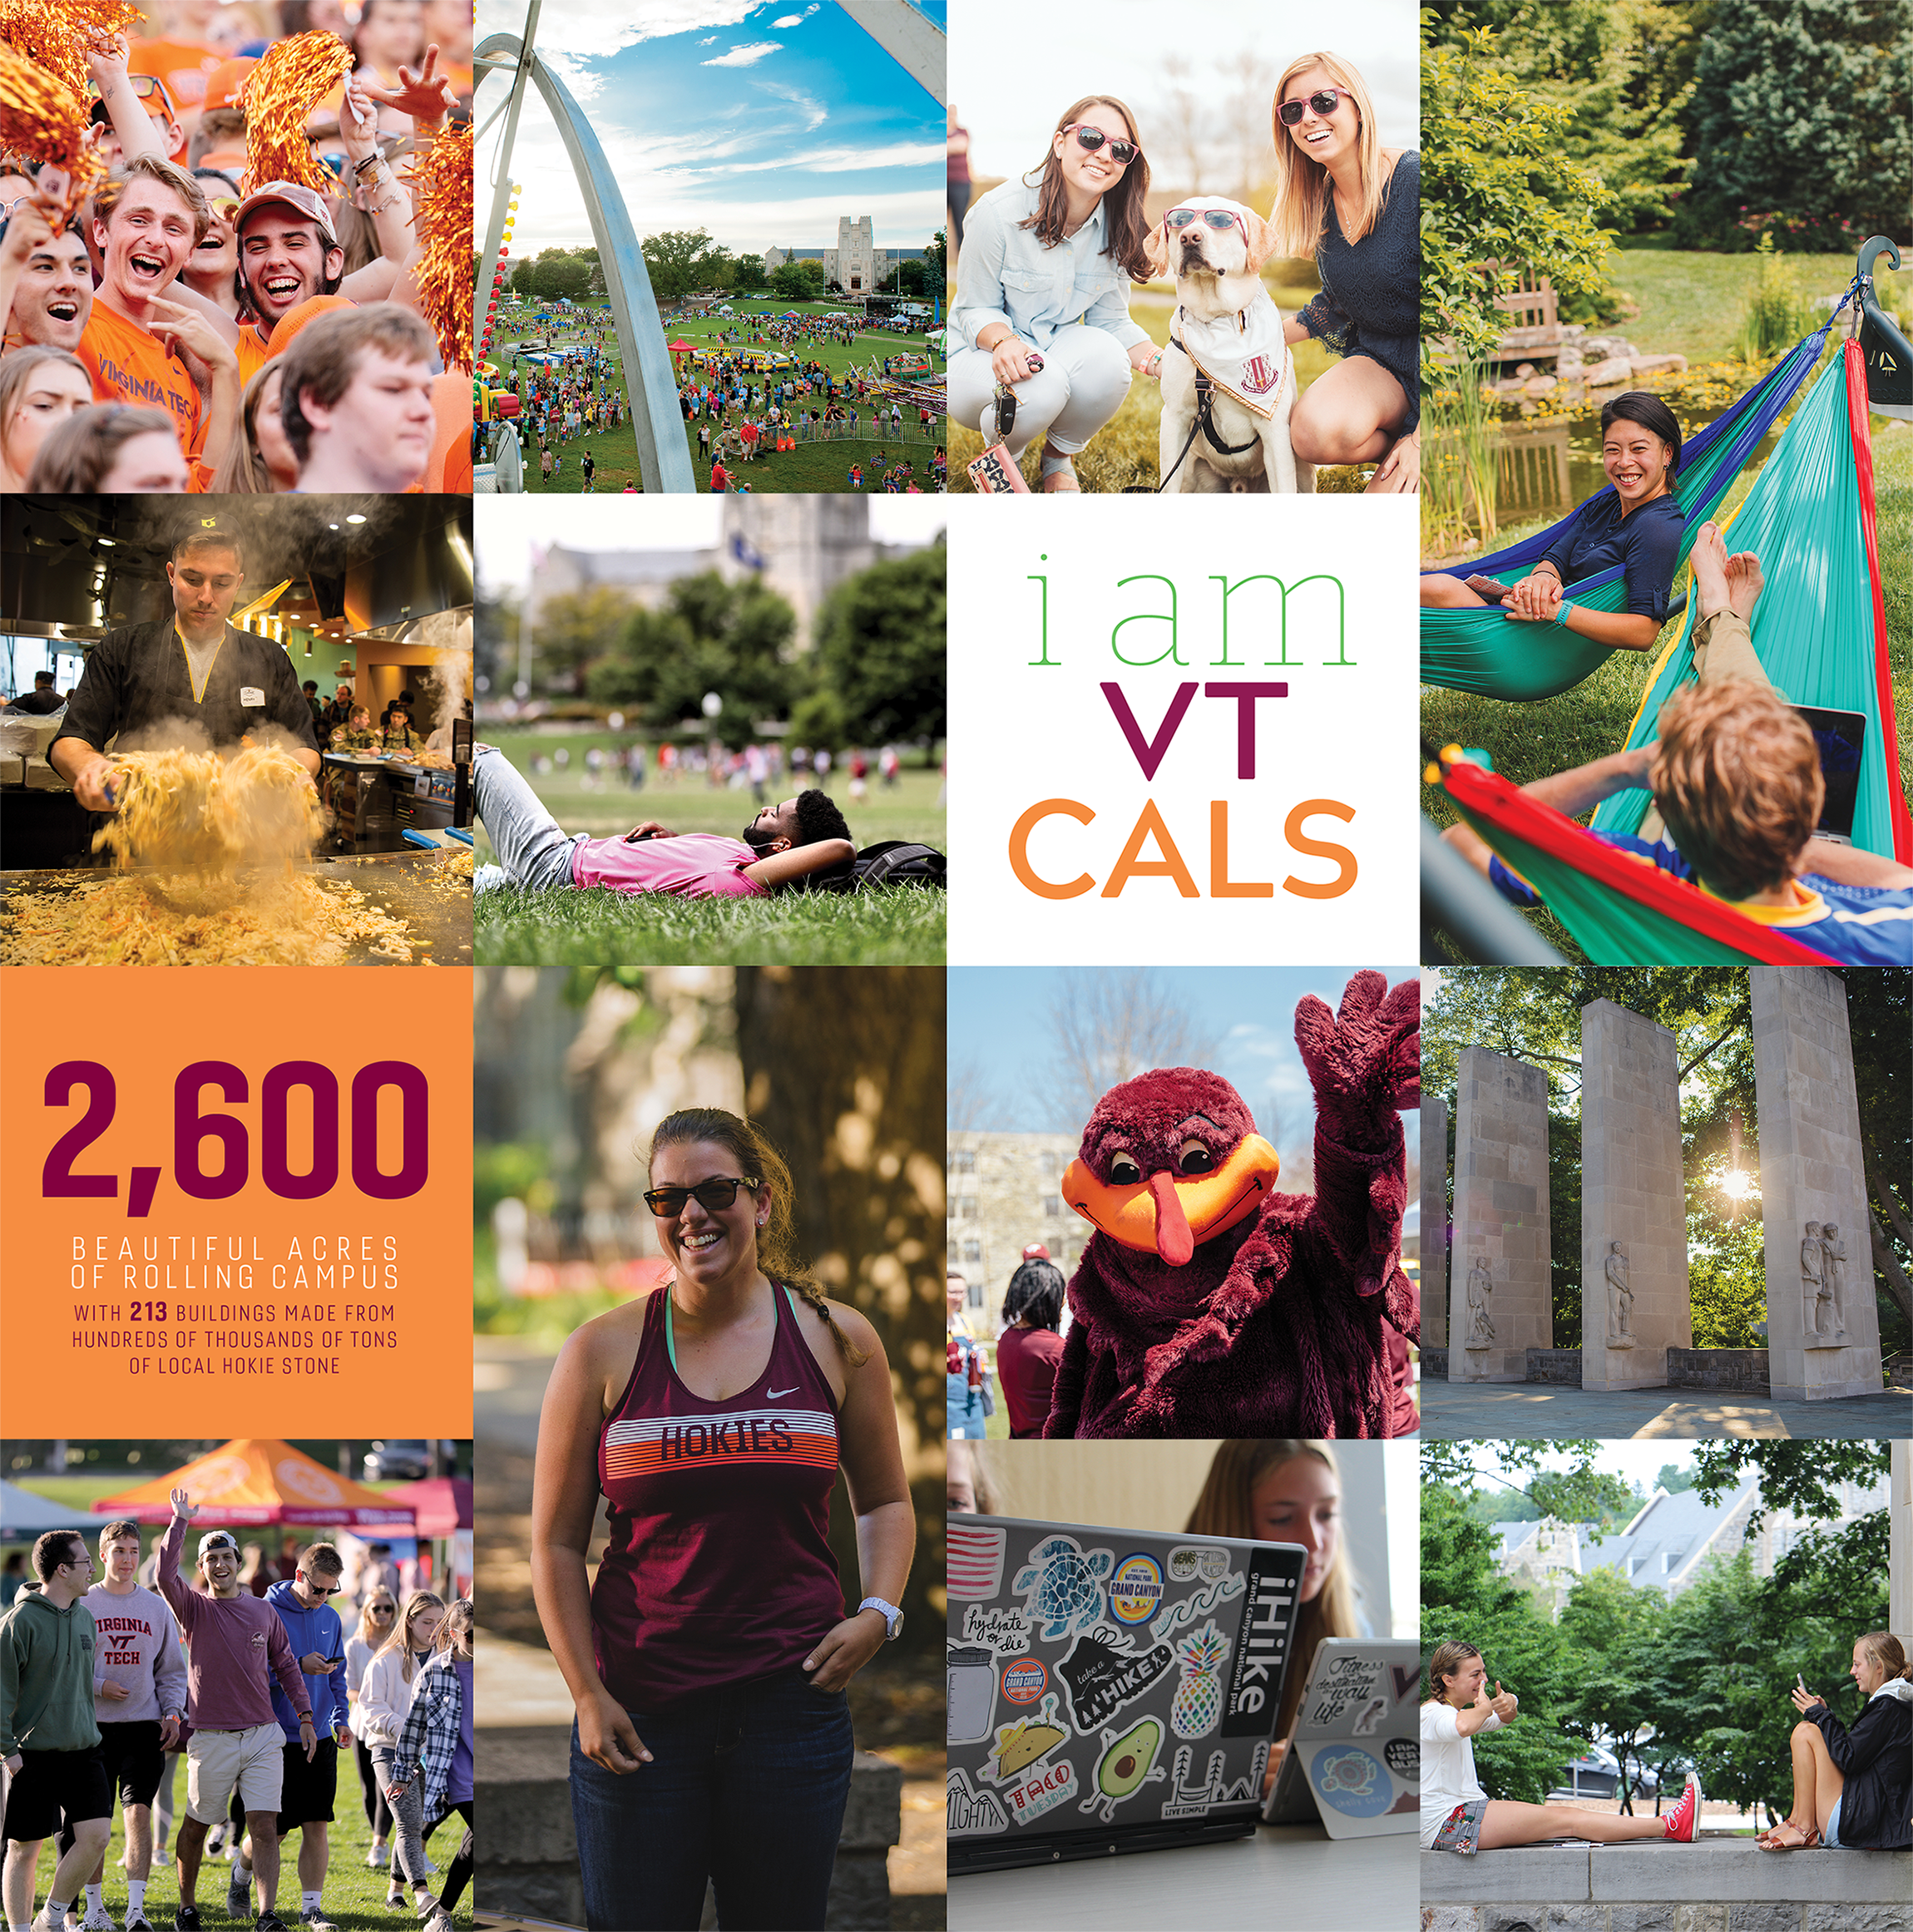 Collage of images of students engaged in various activities outdoors on the Virginia Tech campus